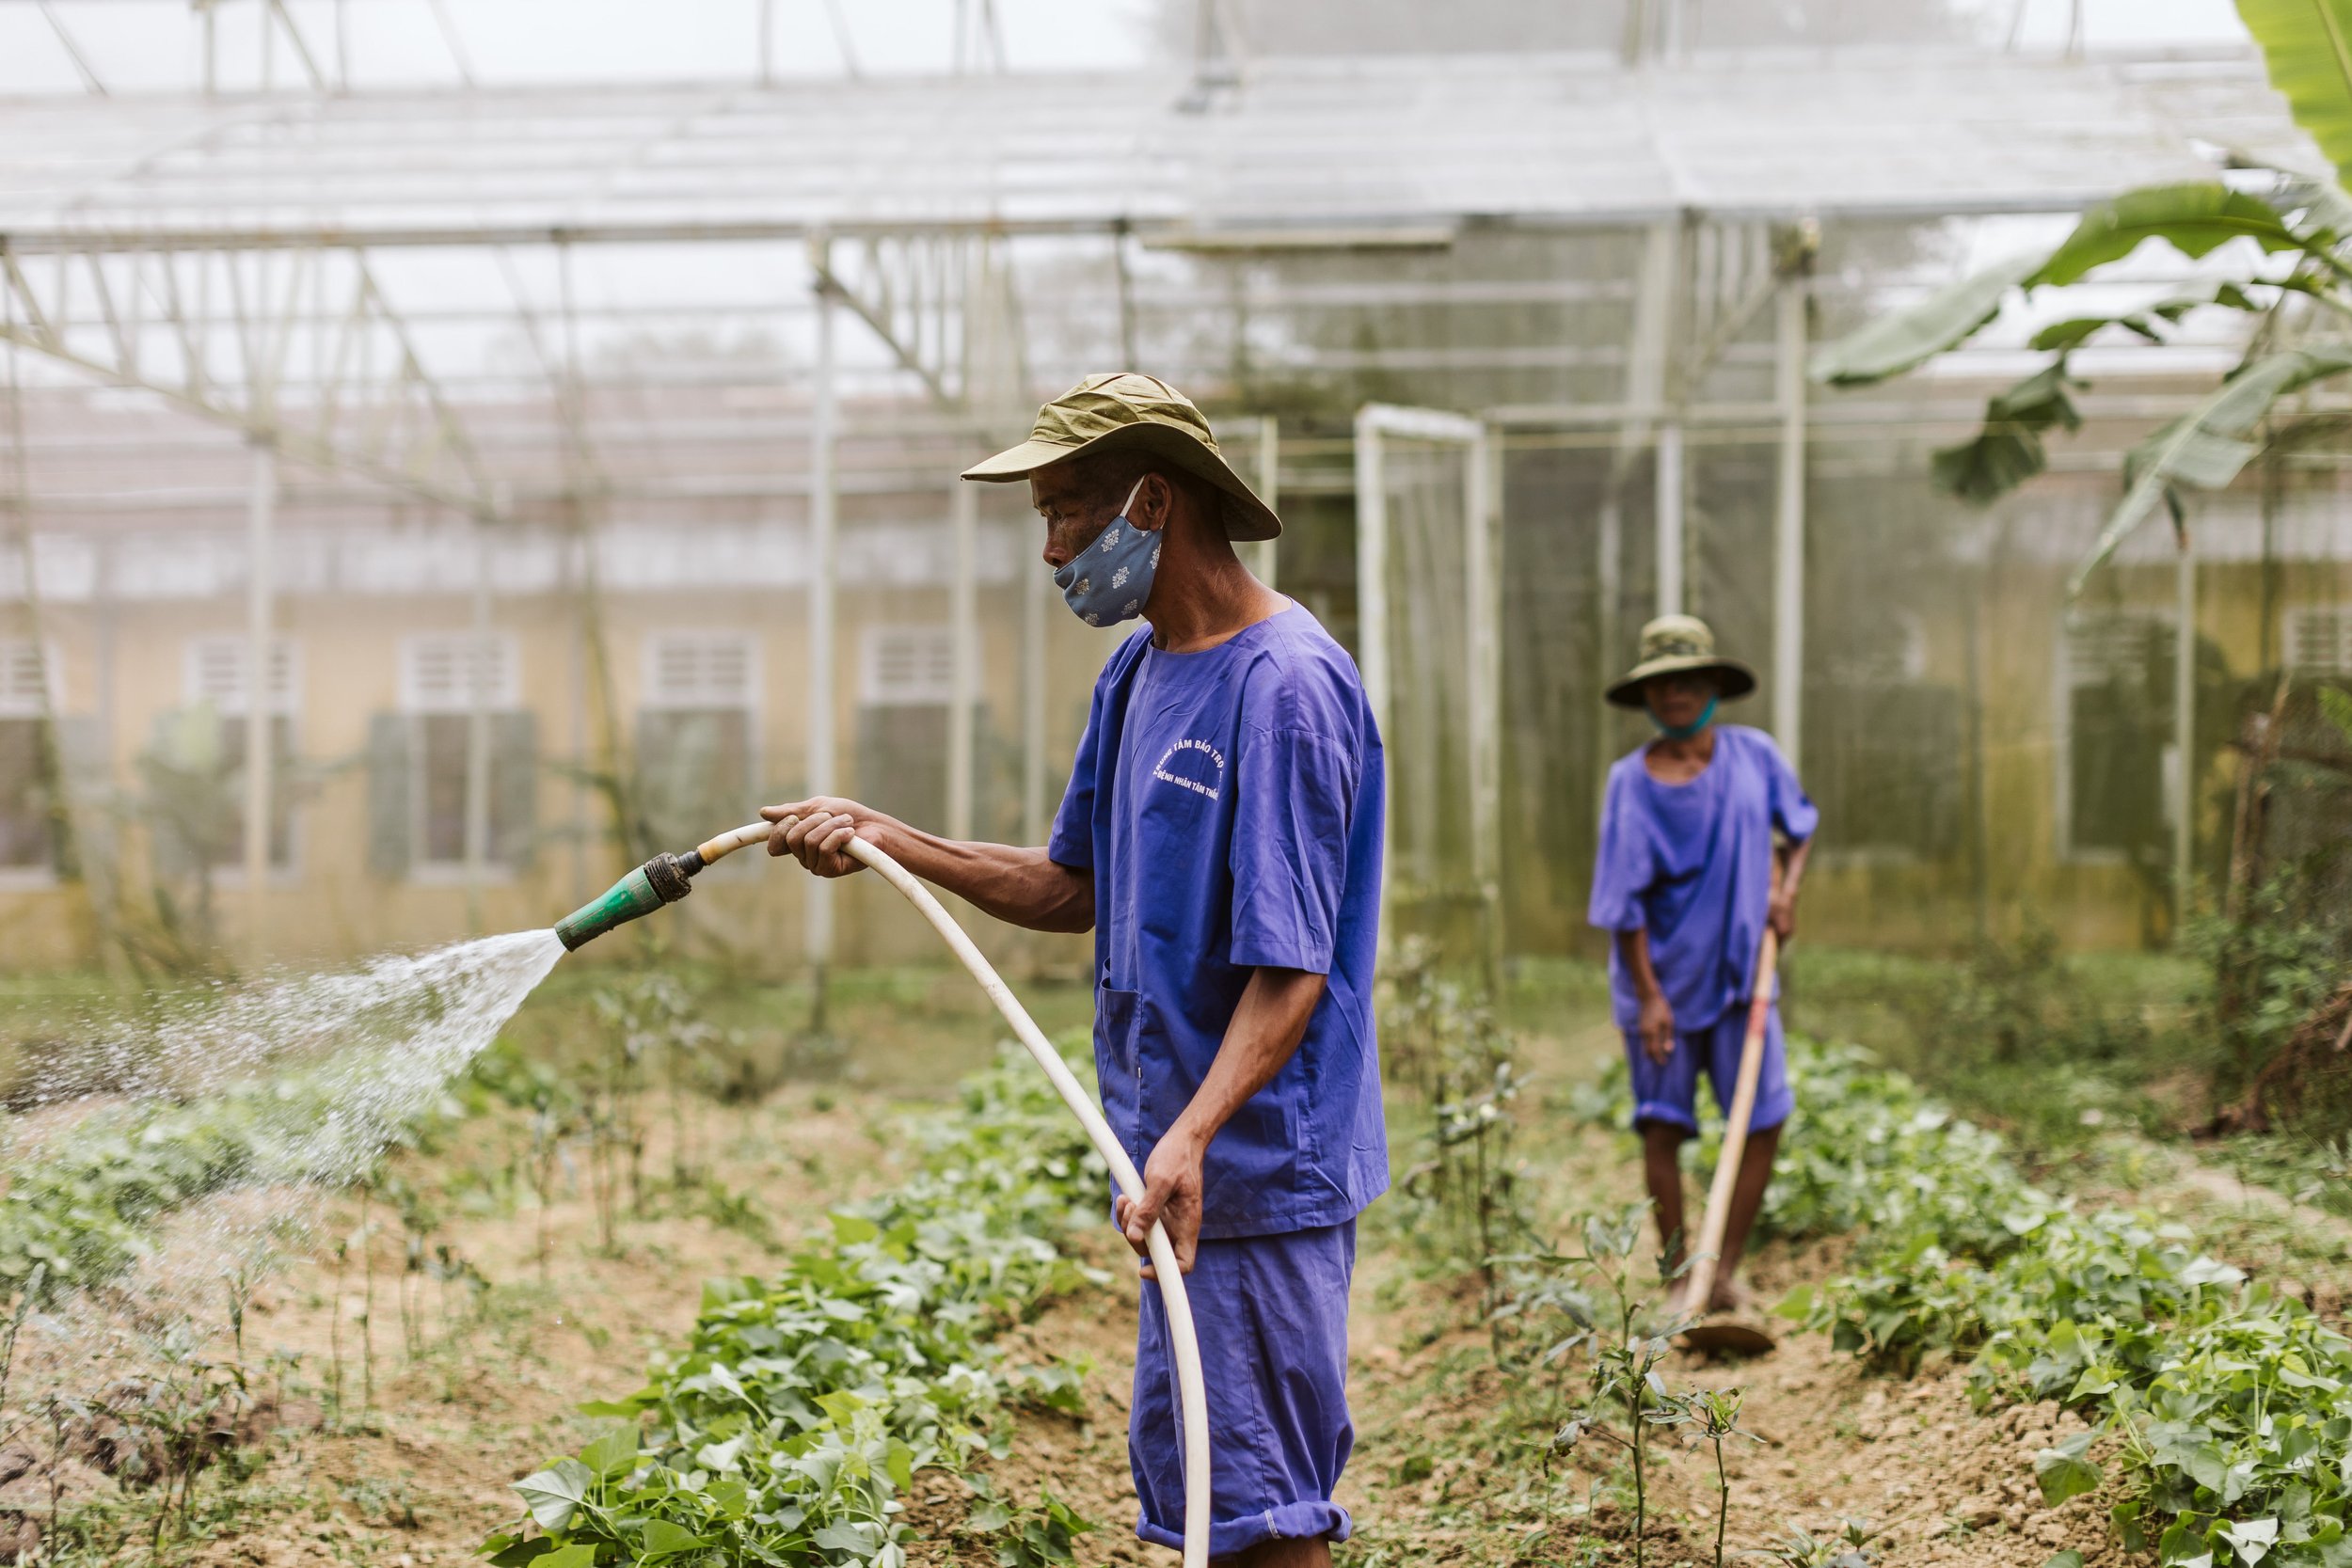 Gardening programs at the Thua Thien Hue Social Center give patients purpose and skills. The food they grow is used for the entire centre.